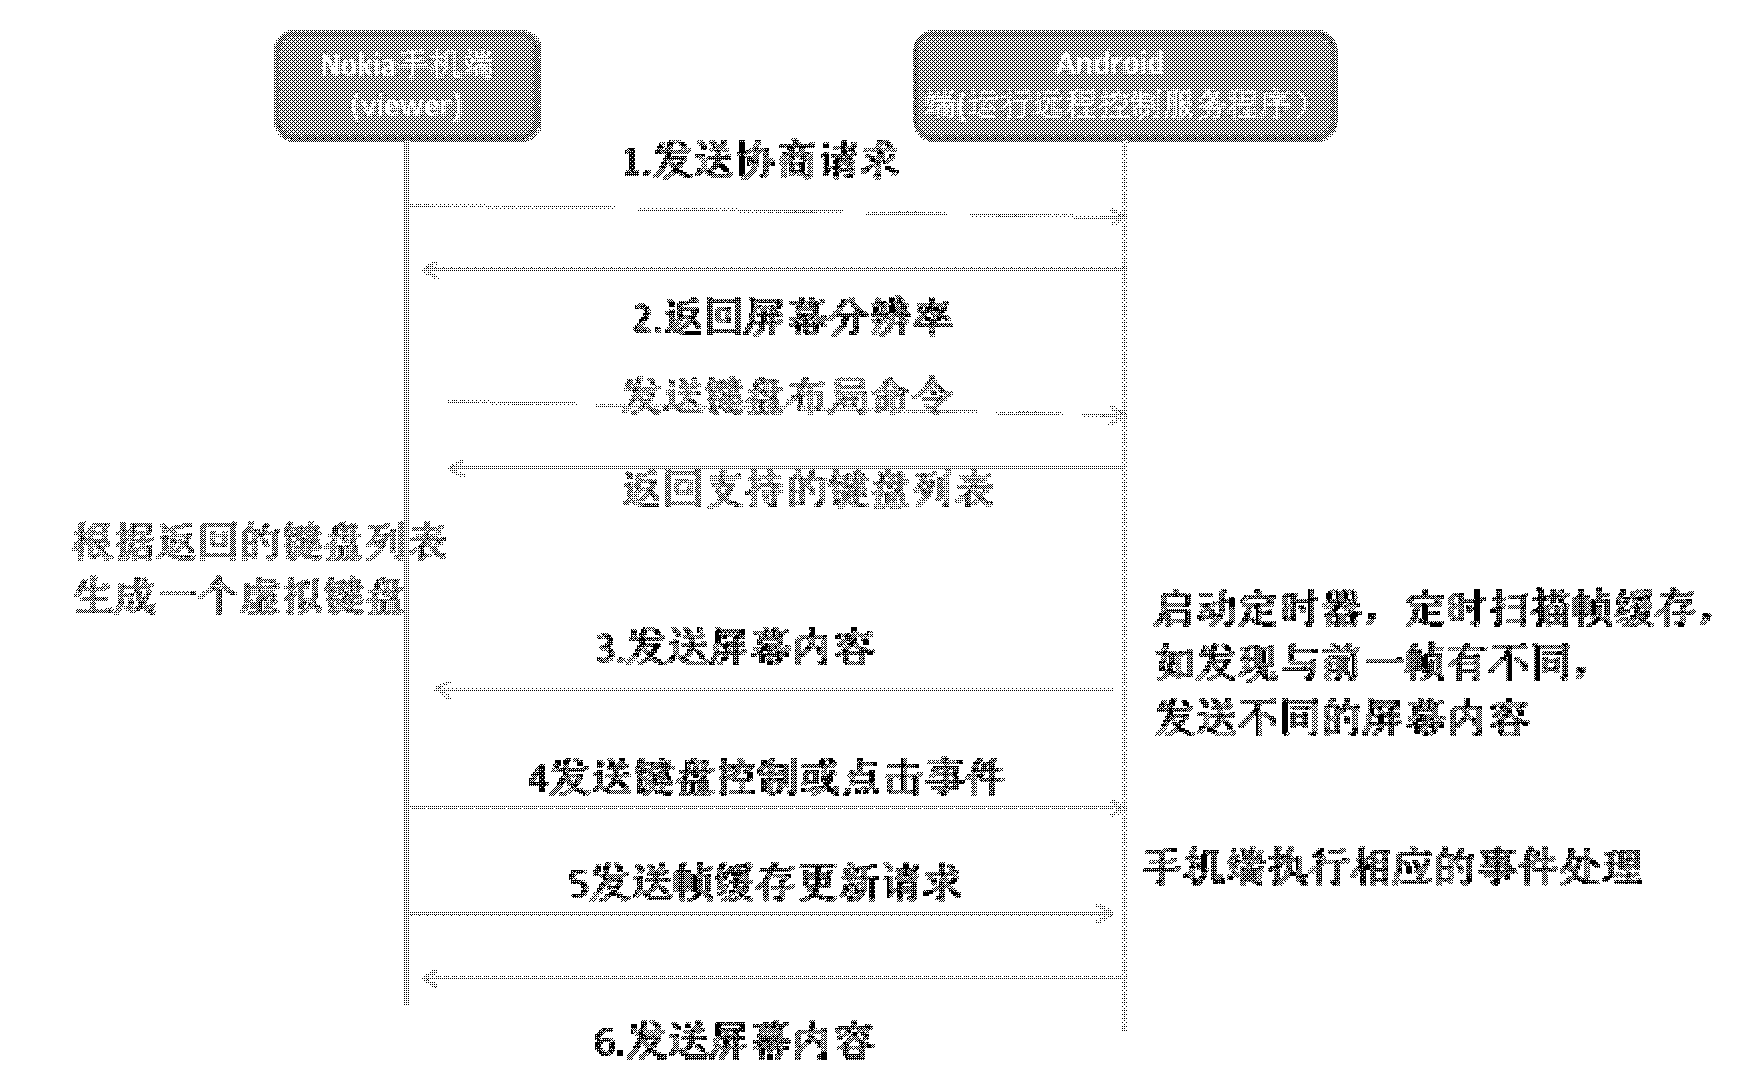 Teleconference communication method and system based on mobile phones